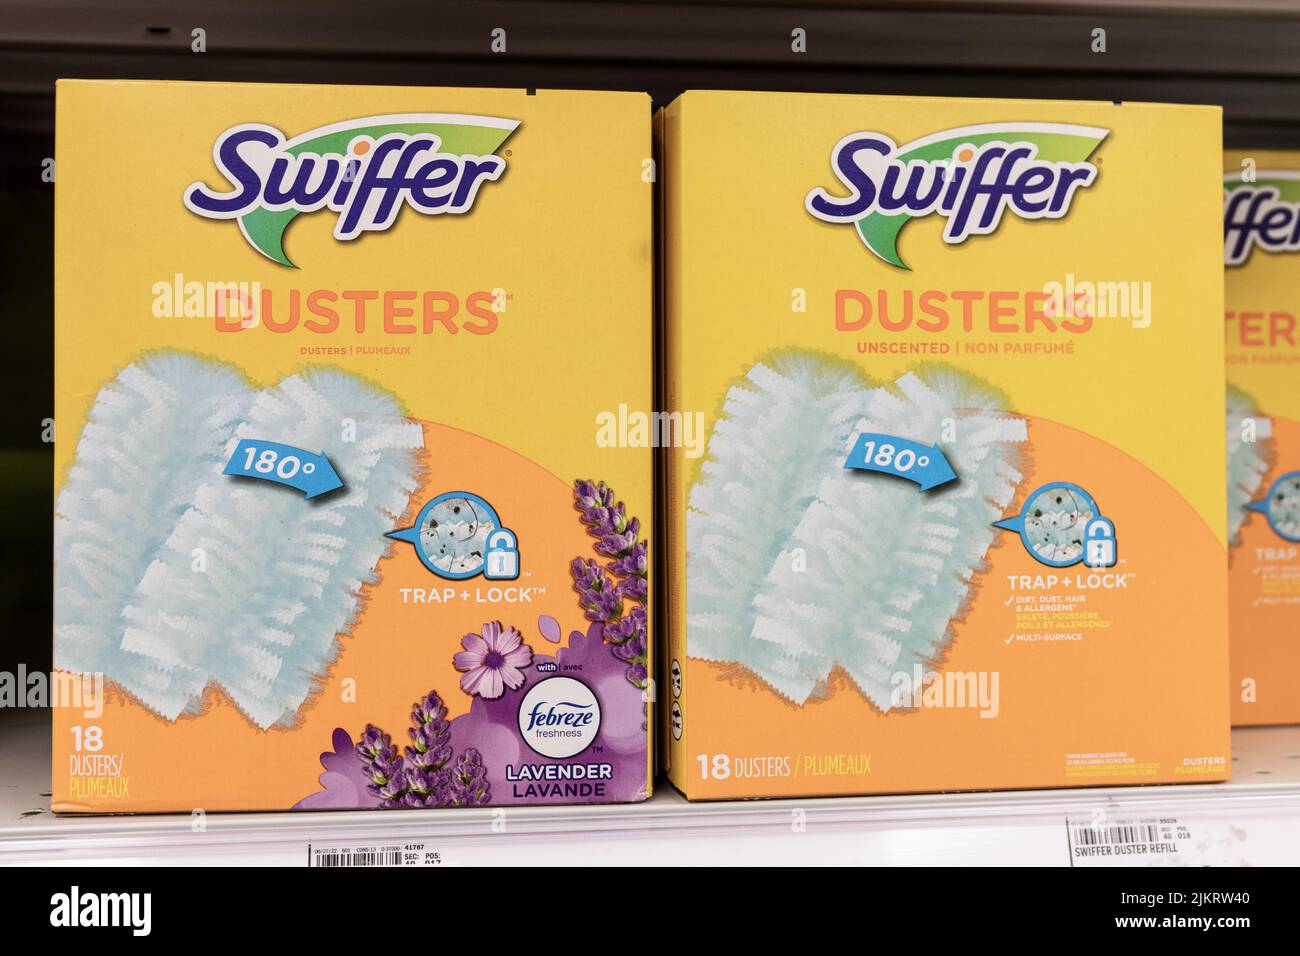 Indianapolis - Circa July 2022: Swiffer Dusters display. Swiffer is a cleaning product manufactured by Procter & Gamble (P&G). Stock Photo